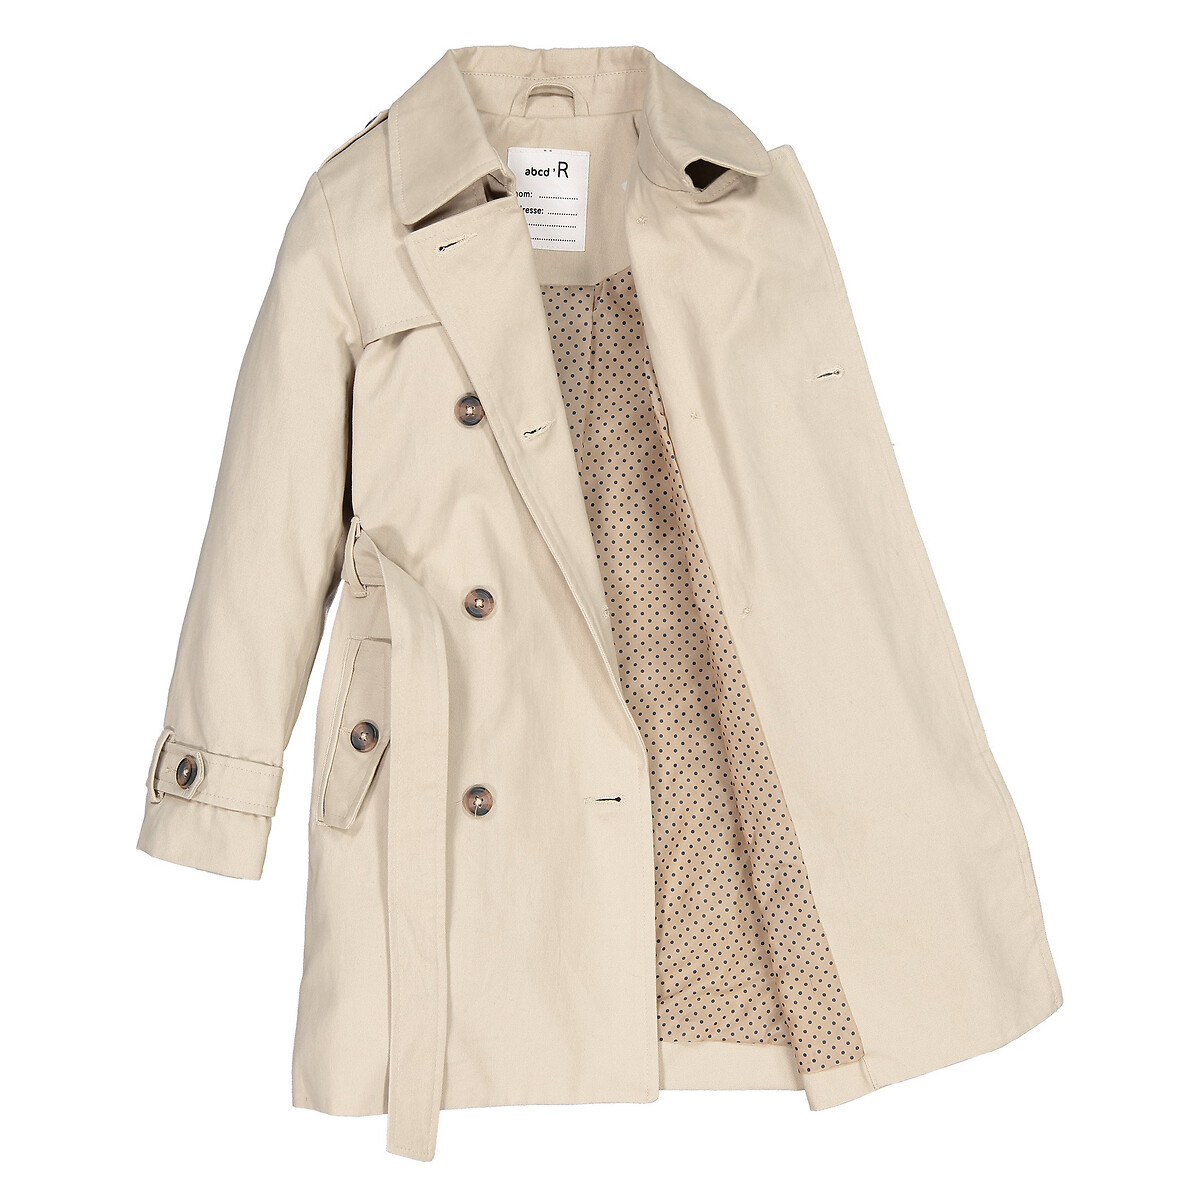 Cotton Trench Coat 3 12 Years La, Ironing A Burberry Trench Coat